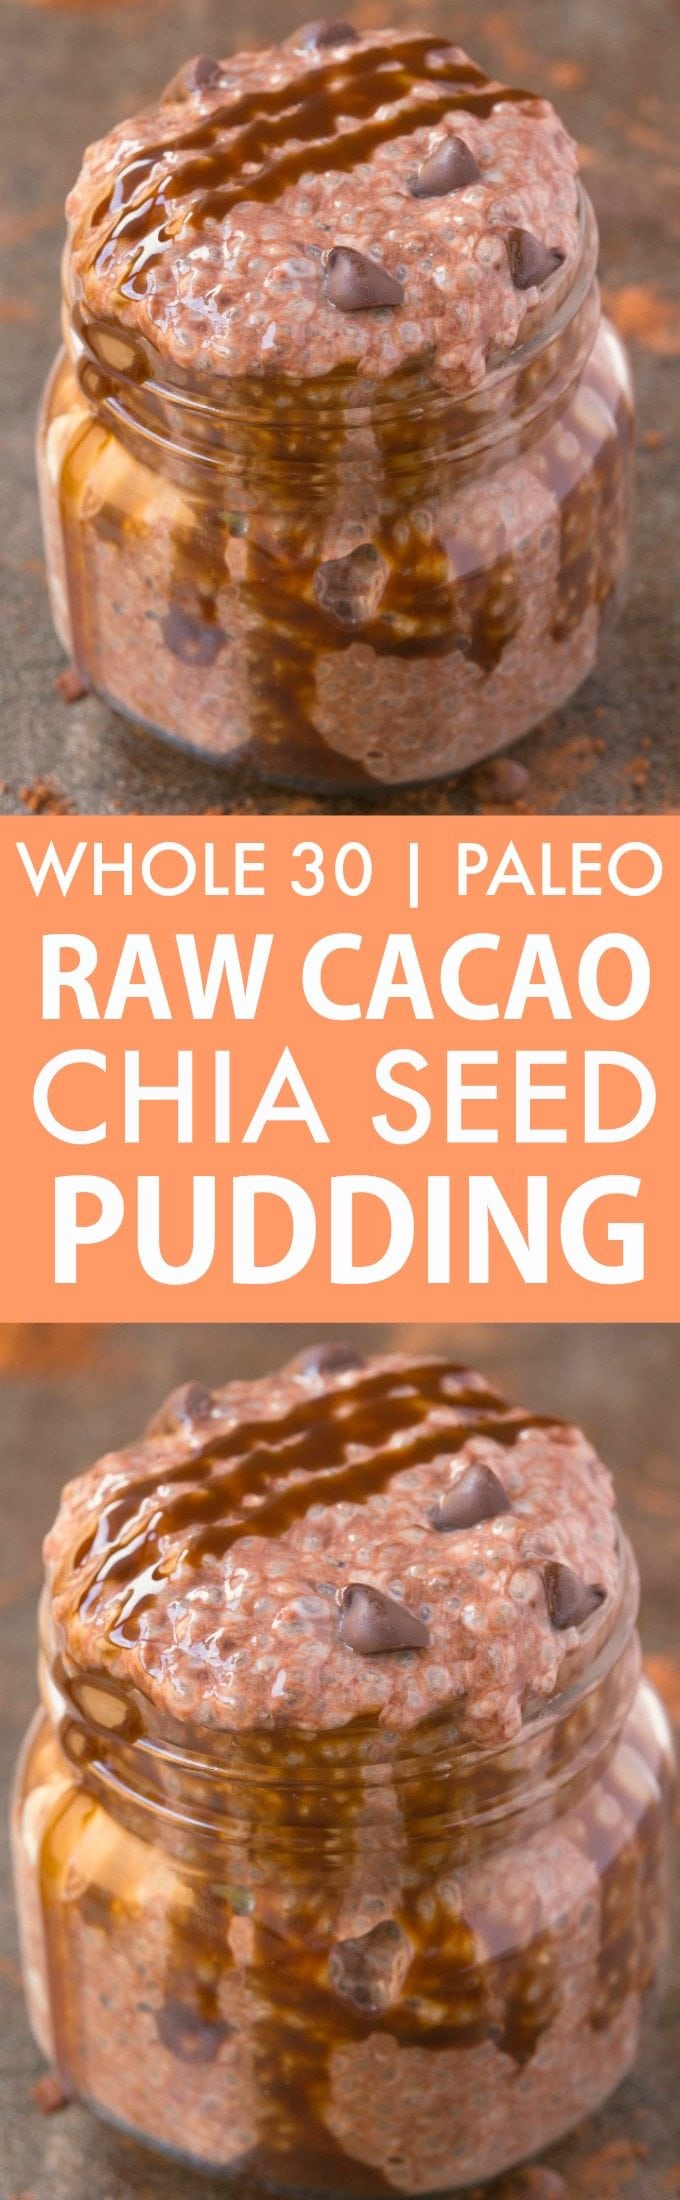 Healthy Raw Cacao Chia Seed Pudding (Whole 30, Paleo, V, GF)- Whole30 approved chia seed pudding- Thick, creamy, satisfying, filling and perfect for breakfast or a snack- Sugar free and dairy free too! {whole 30, paleo, vegan, gluten free recipe}- thebigmansworld.com